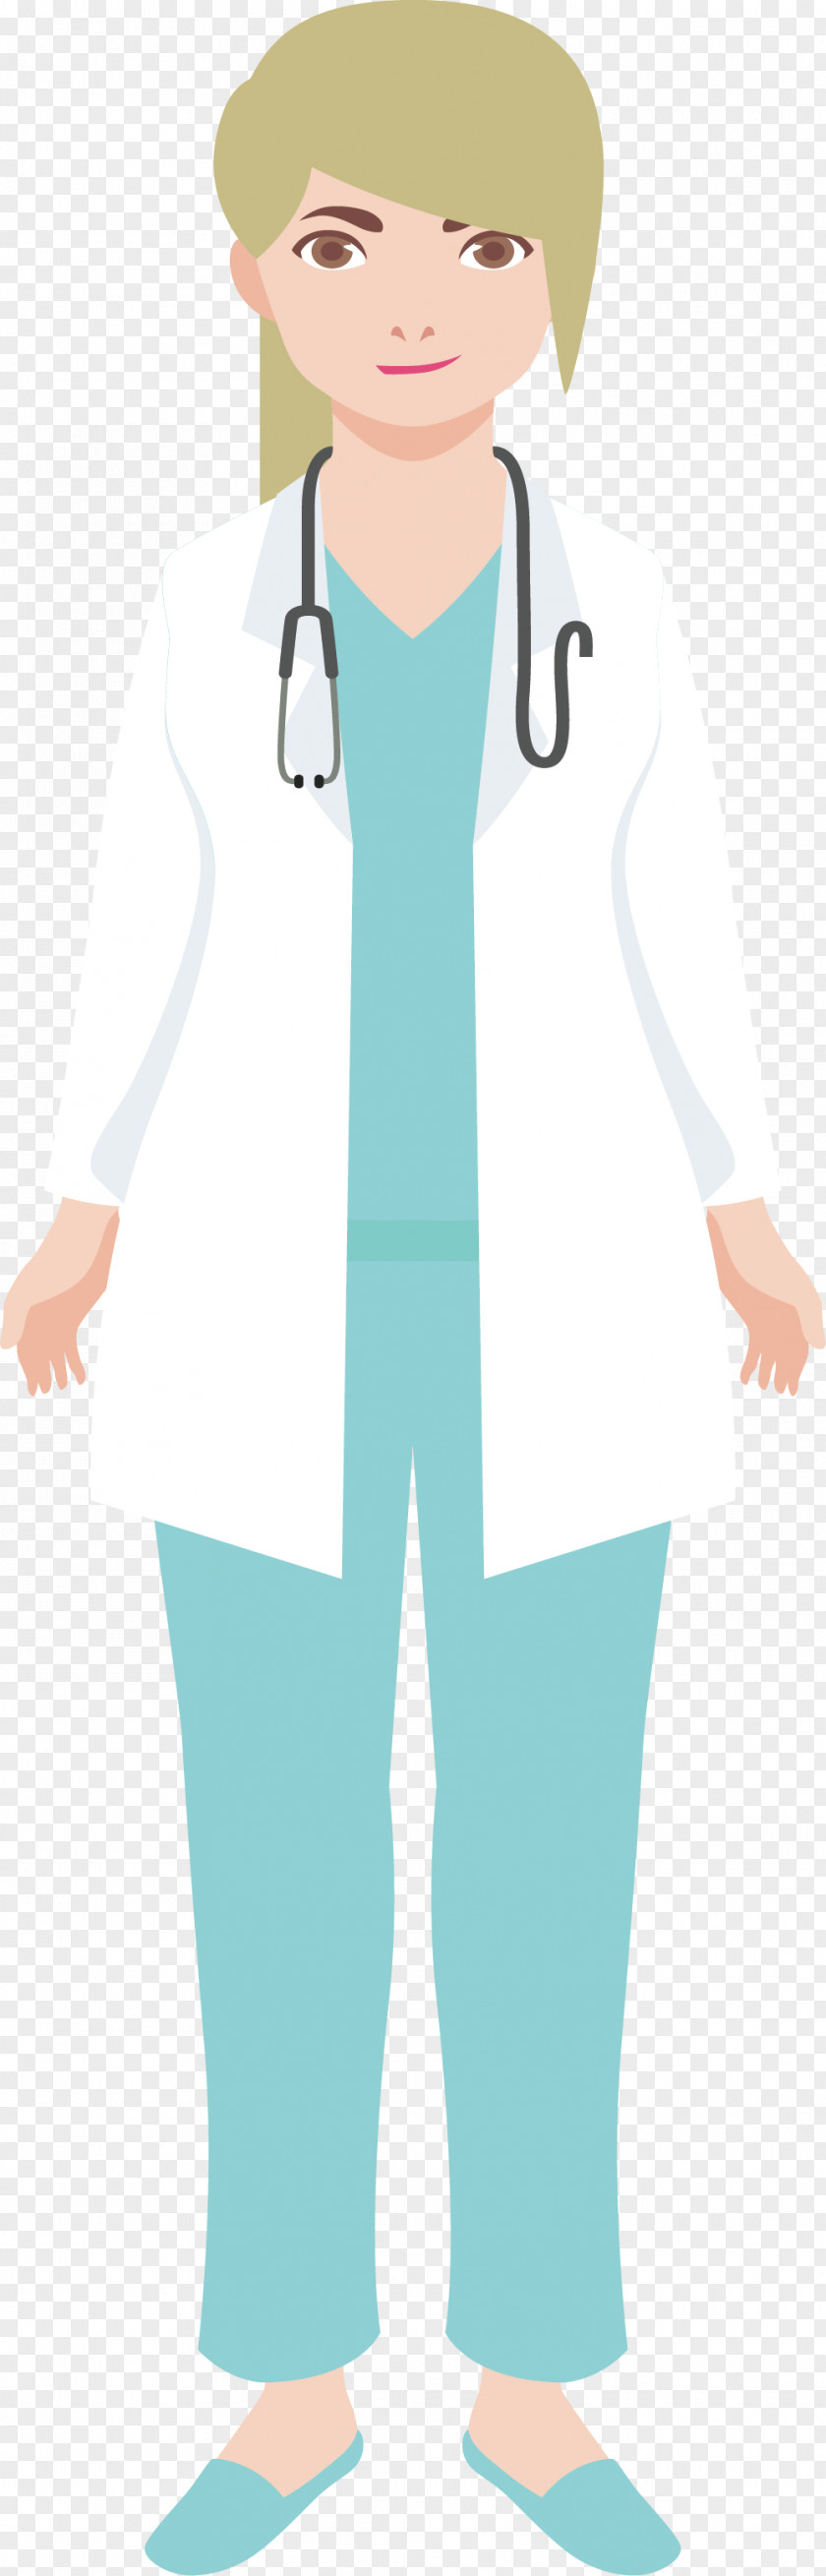 A Doctor In White Coat Physician PNG